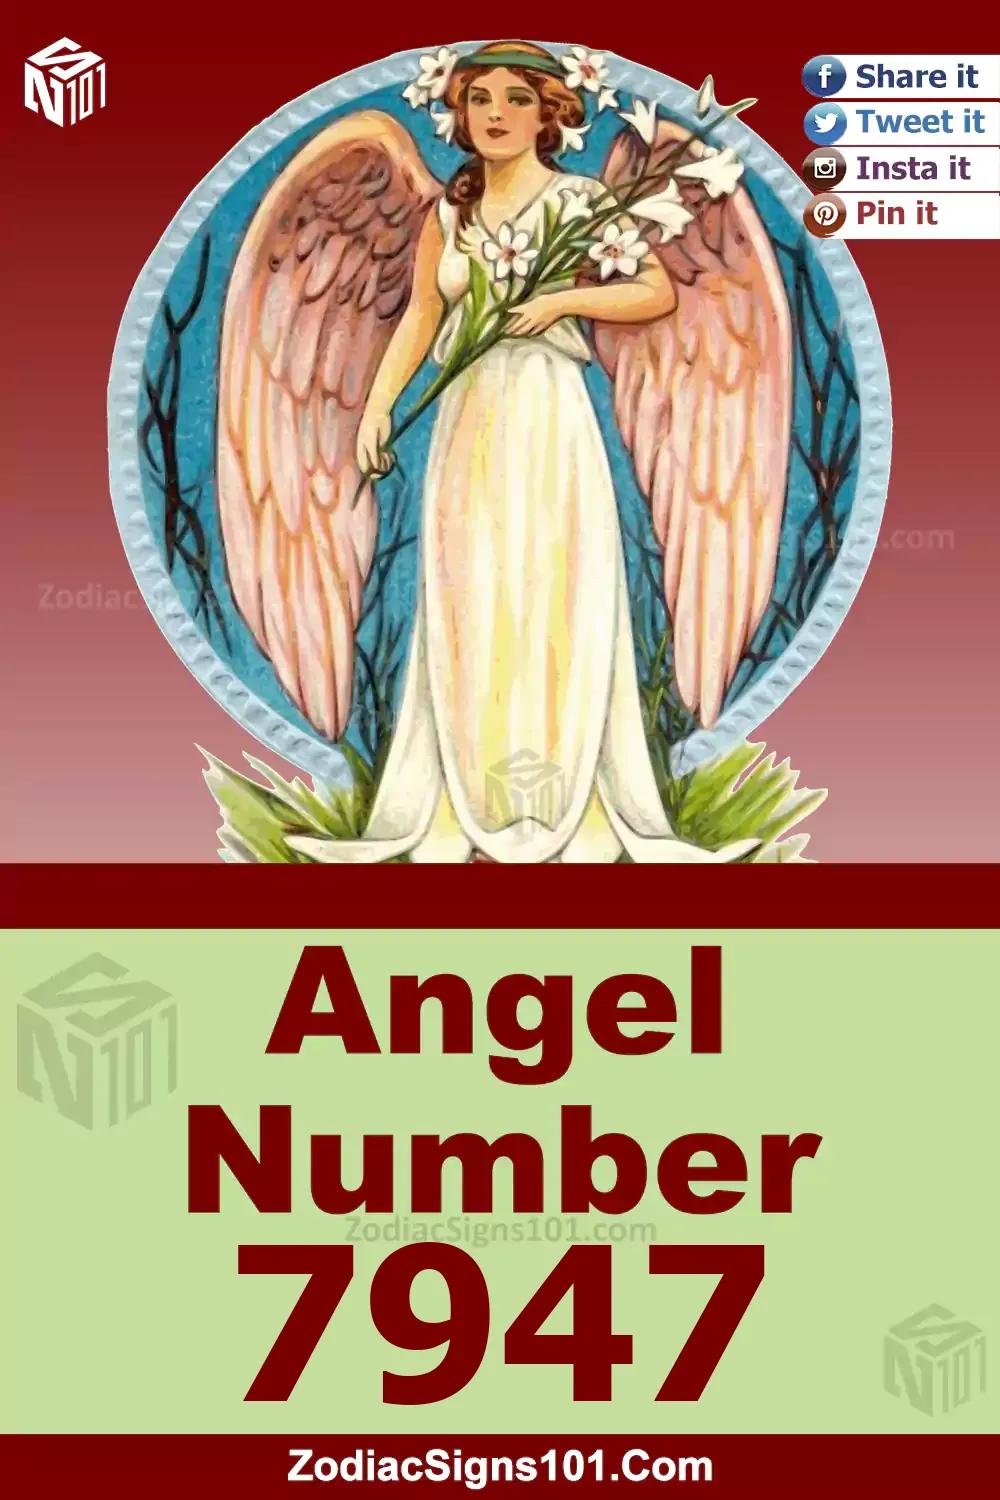 7947 Angel Number Meaning